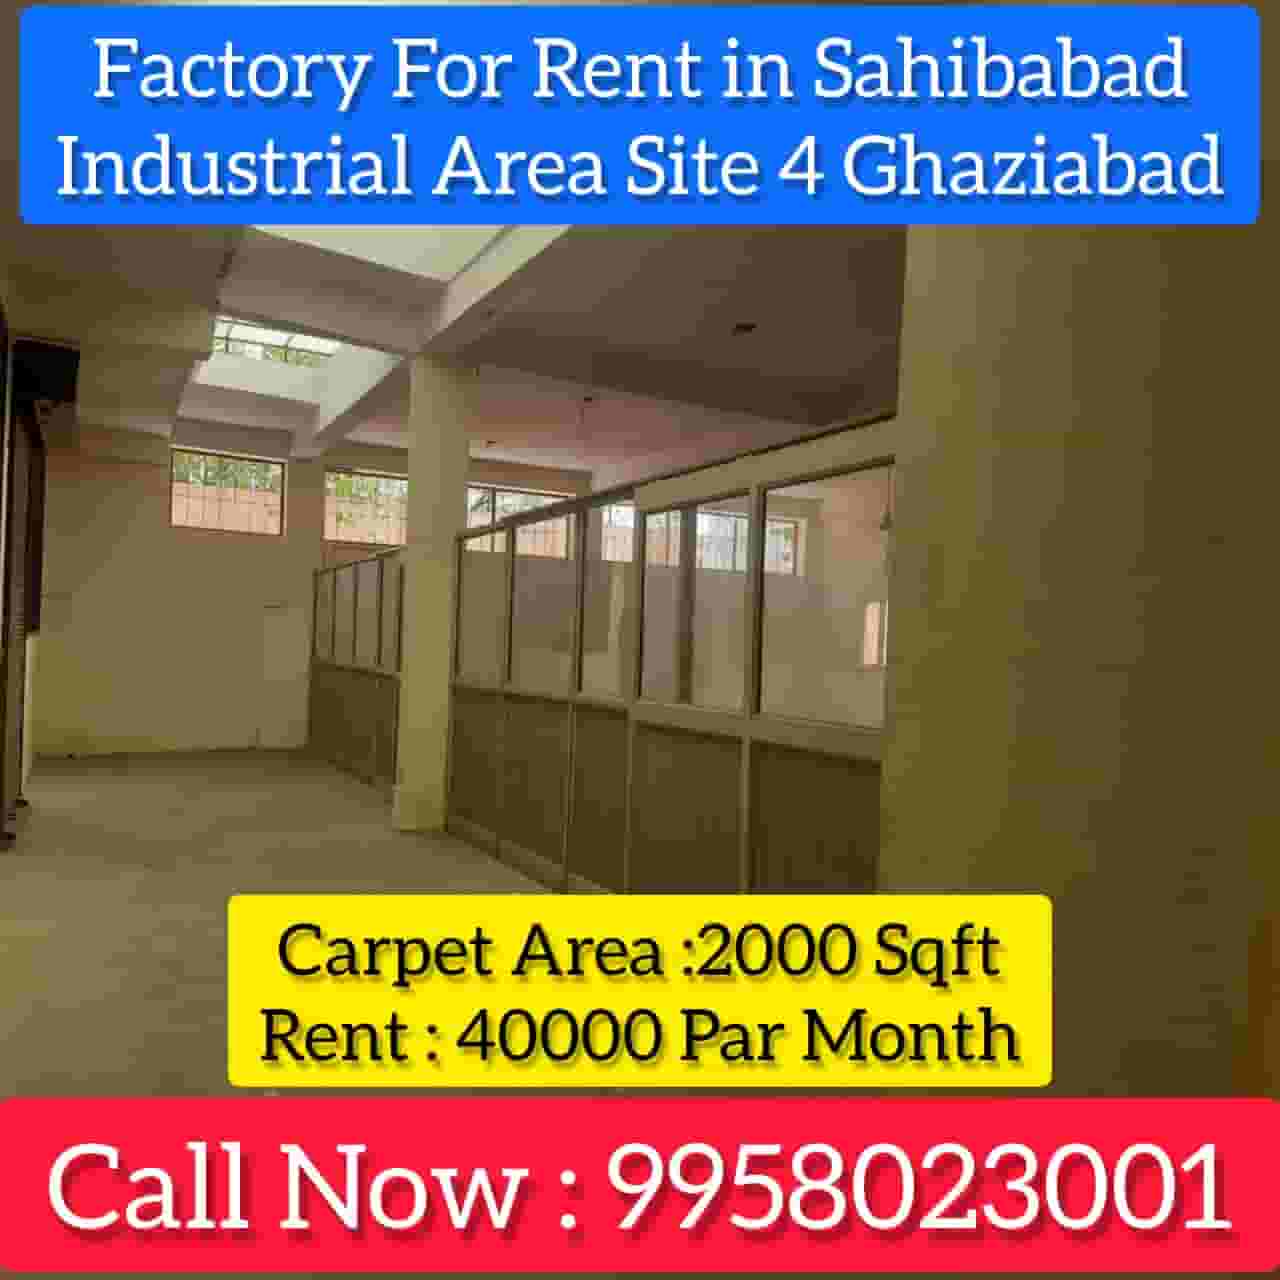 Factory for Rent in Sahibabad Industrial Area Site 4, Ghaziabad